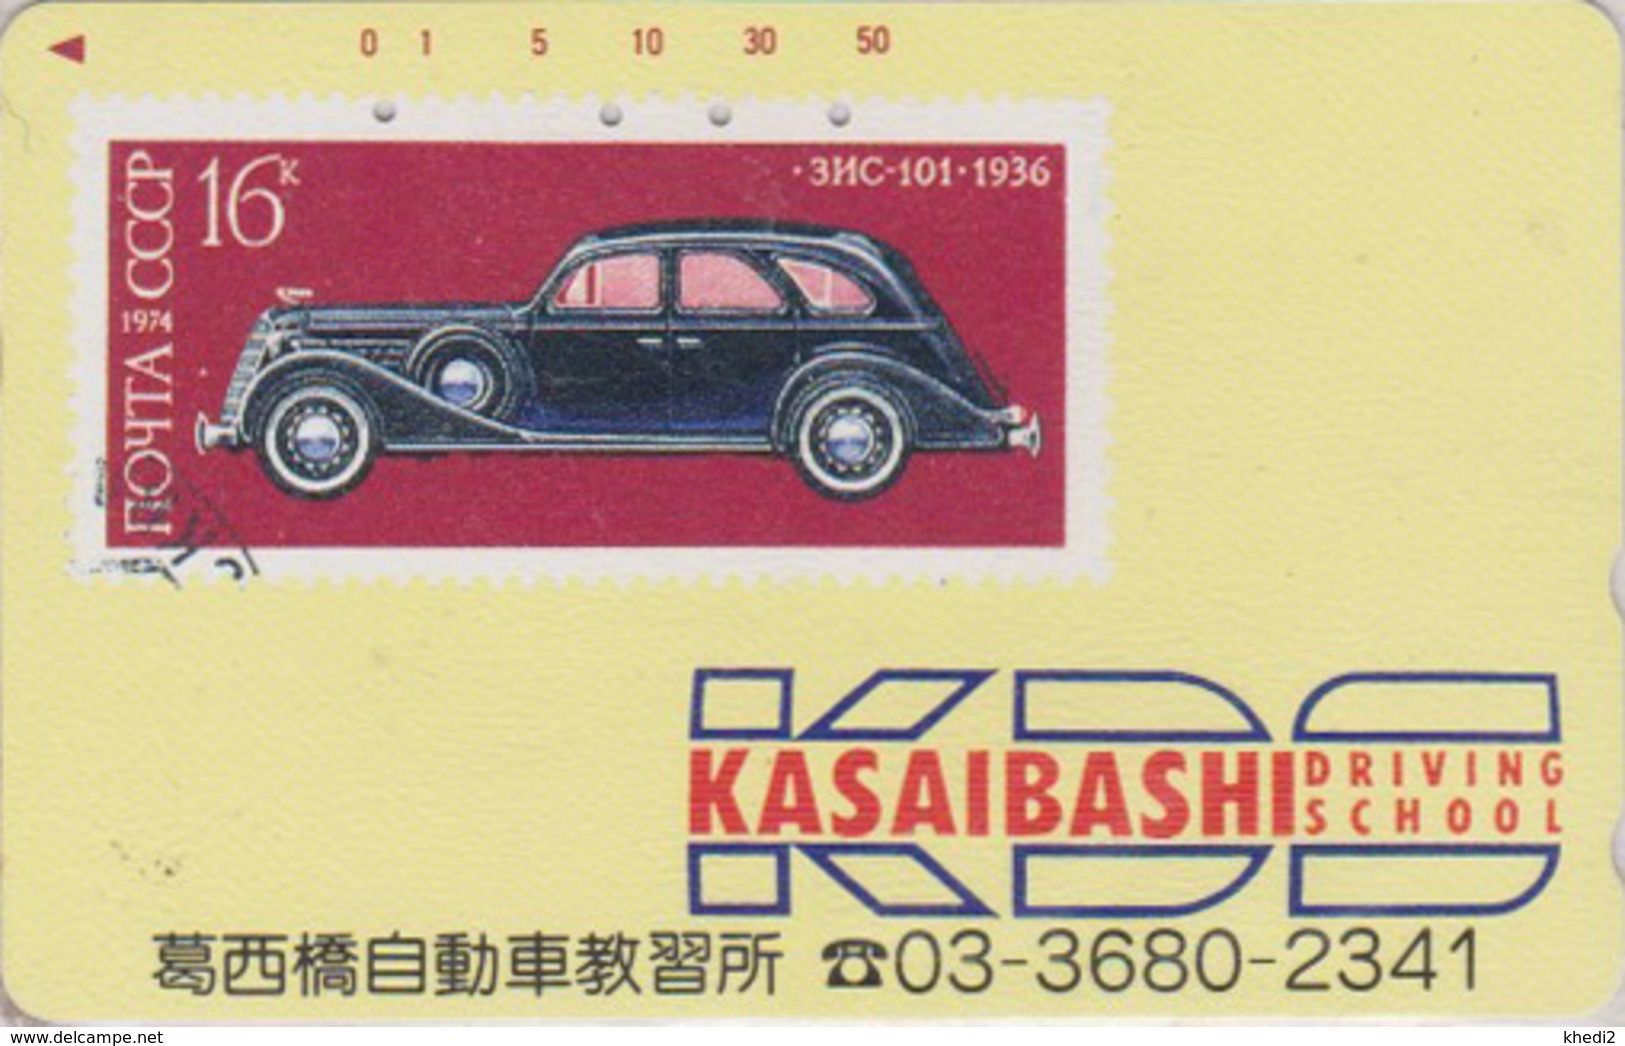 TC JAPON / 110-166836 - VIEILLE VOITURE Sur TIMBRE RUSSIE CCCP - OLDTIMER CAR On RUSSIA STAMP JAPAN Free Phonecard 104 - Timbres & Monnaies